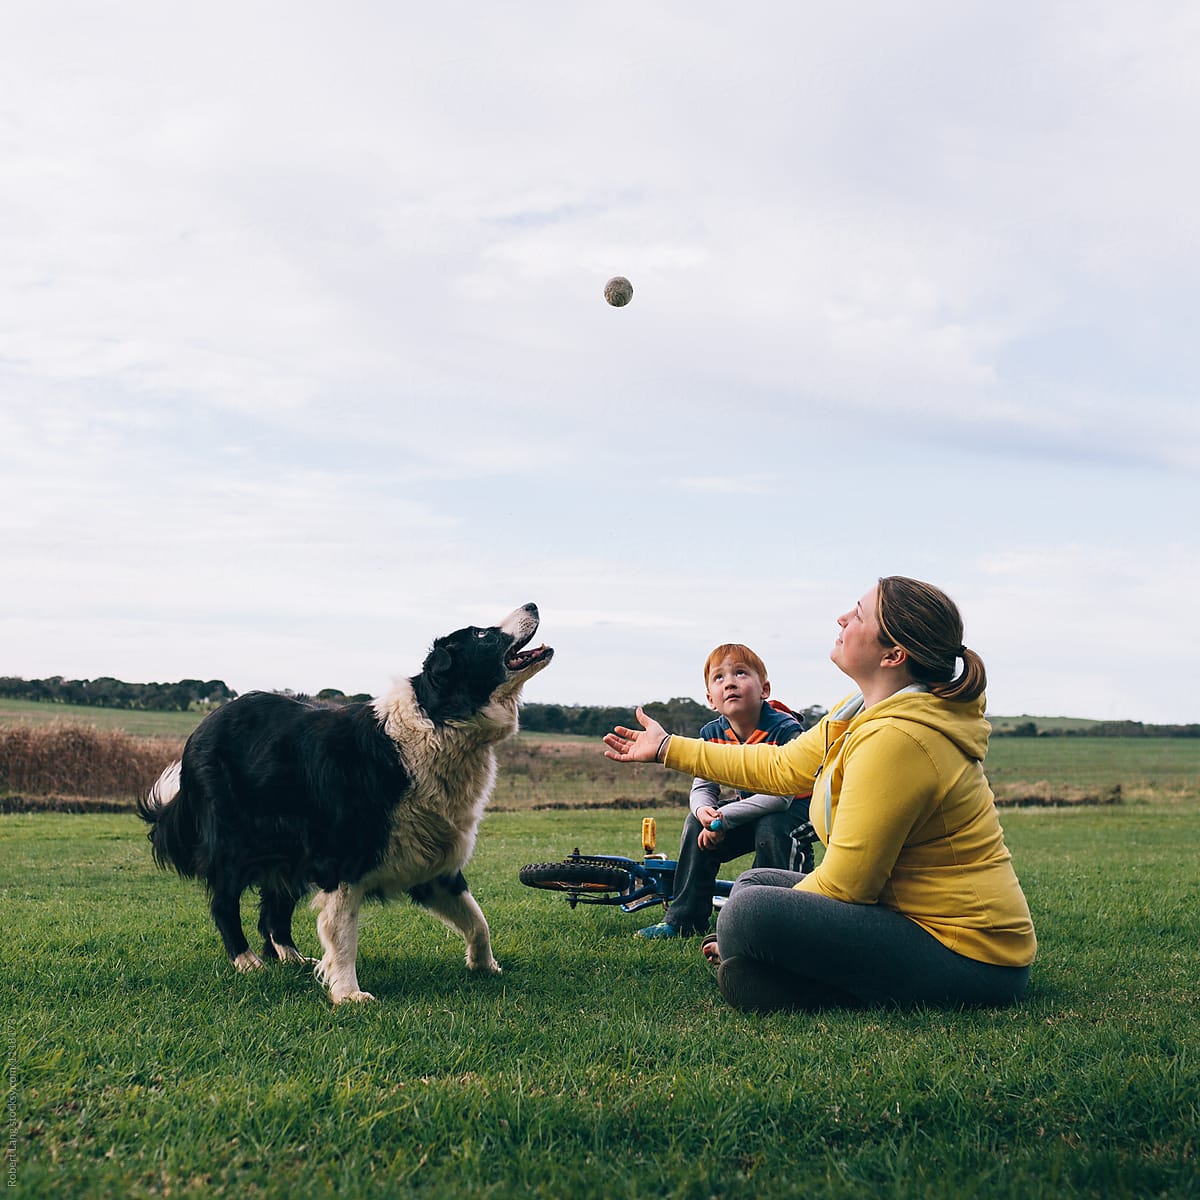 Playing catch with the family dog